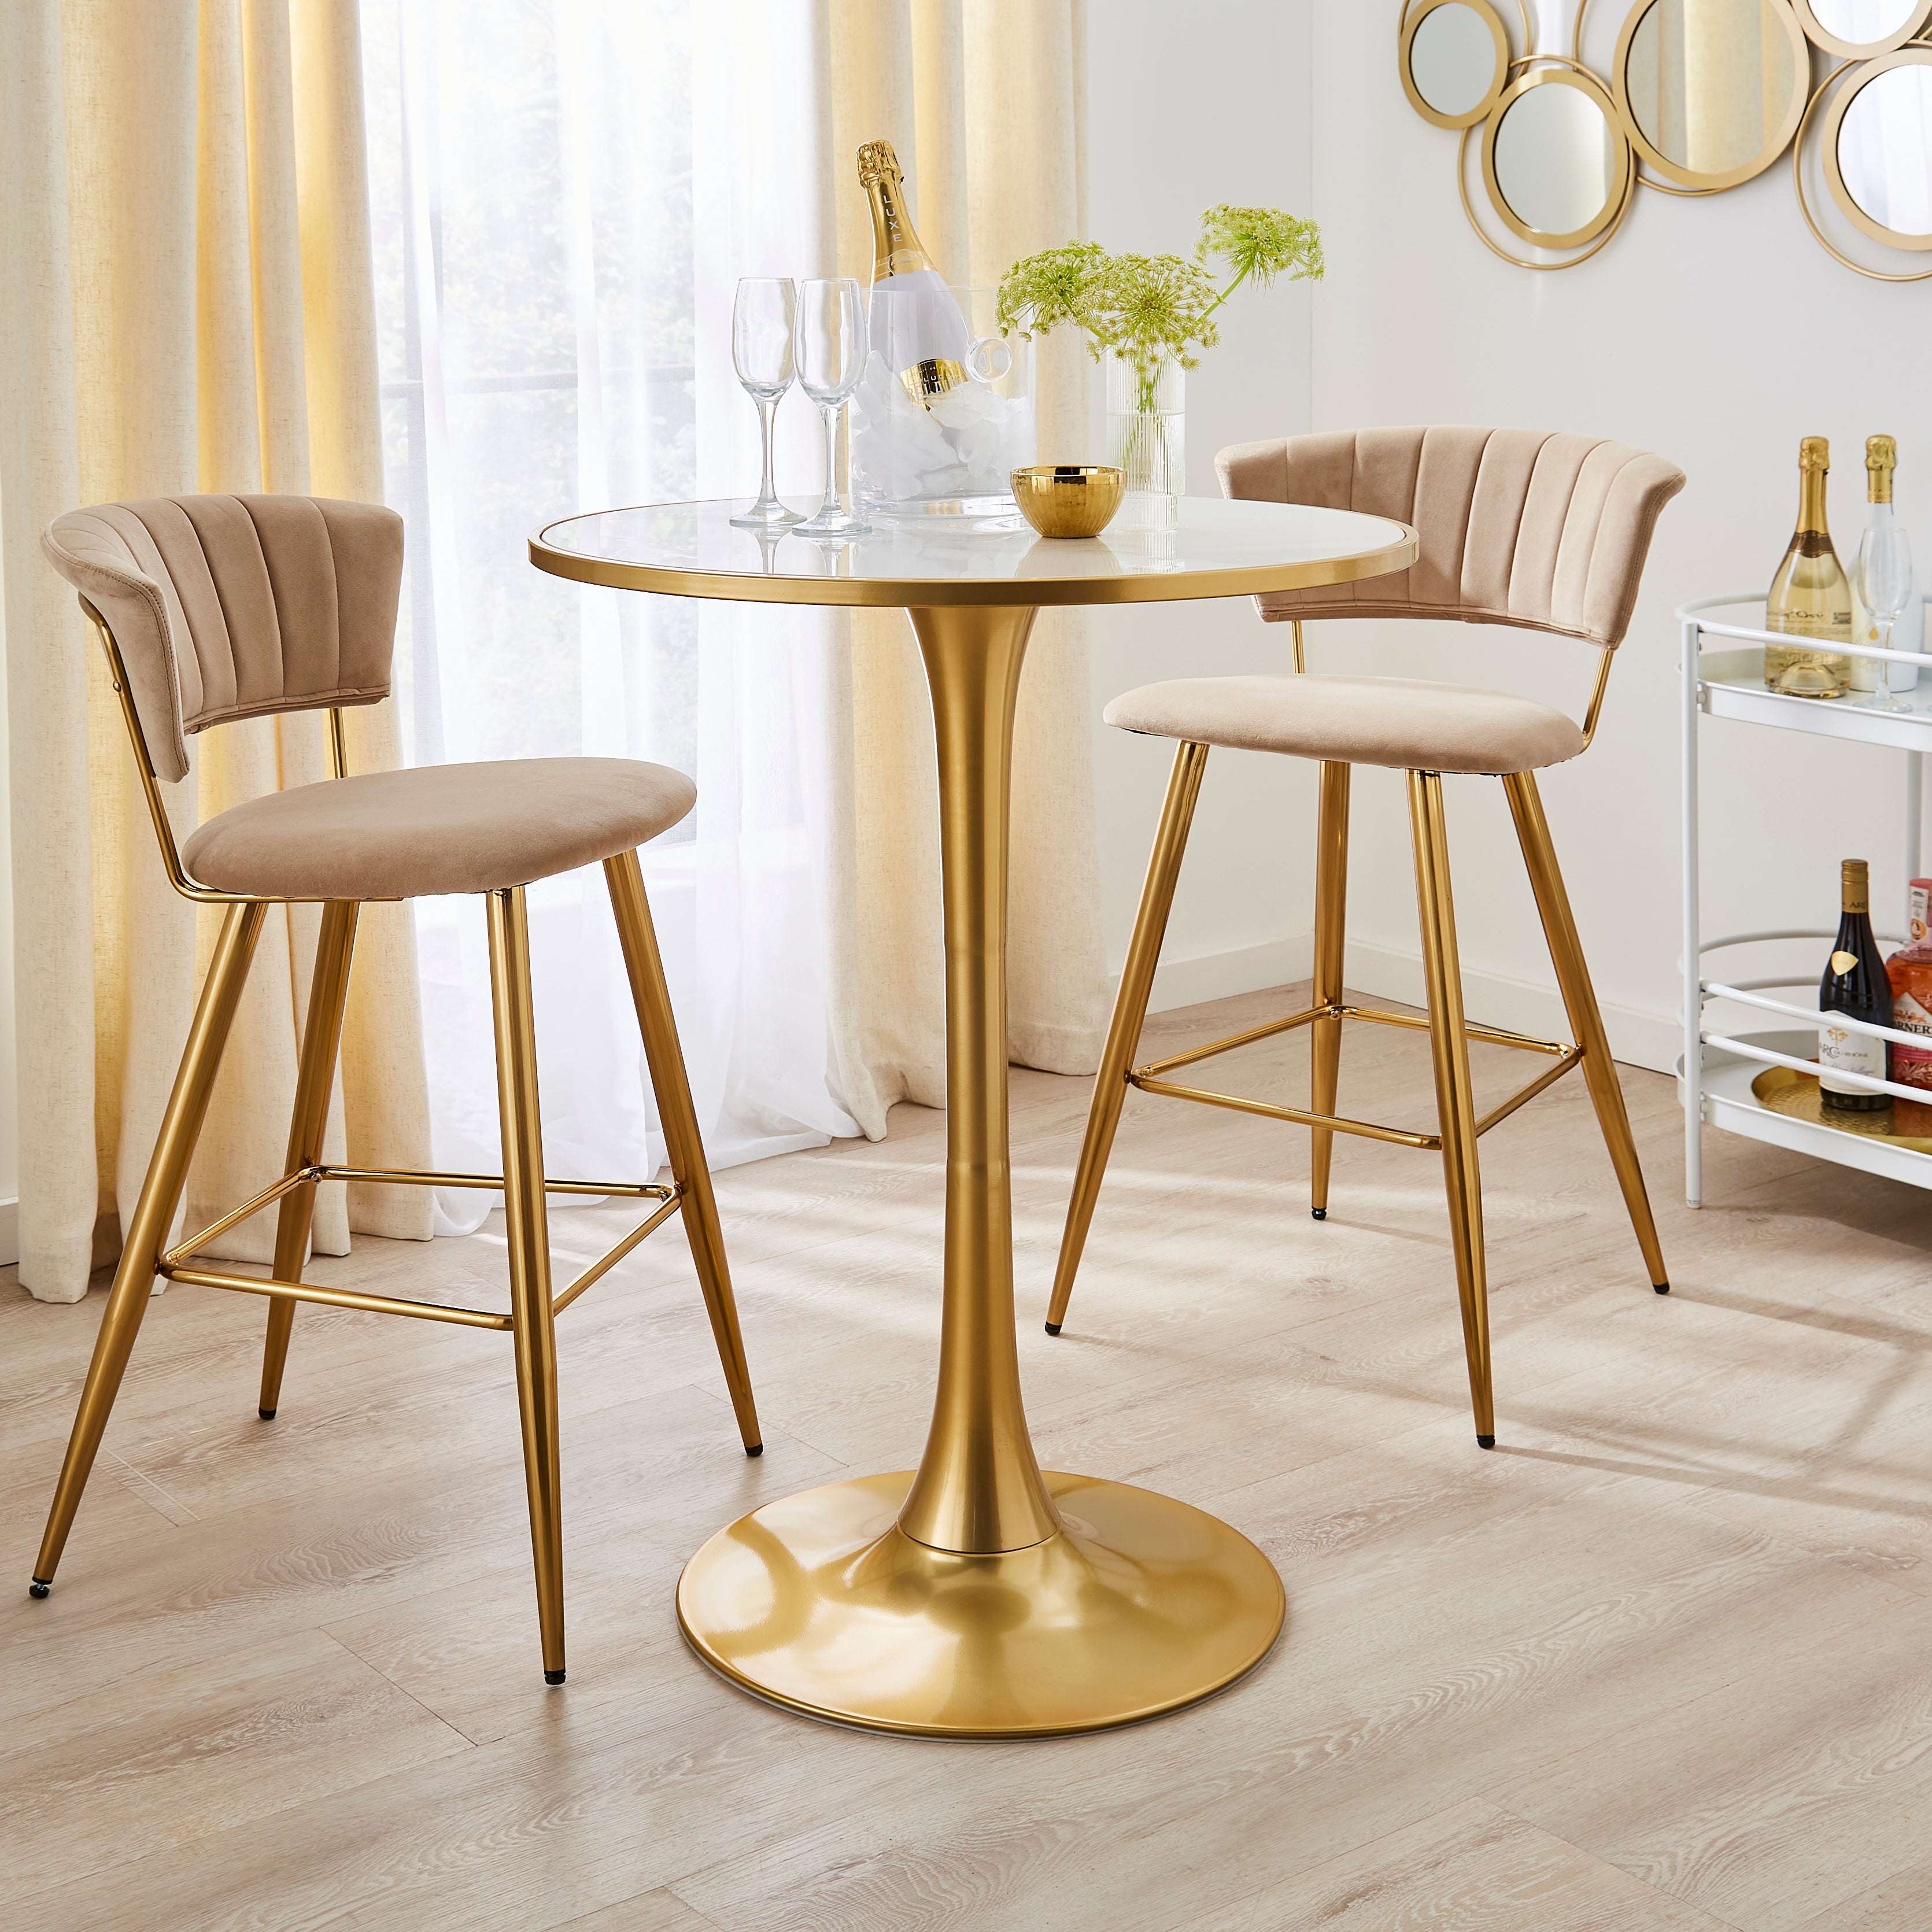 Silas Bar Table With 2 Kendall Bar Stools Kendall Mink